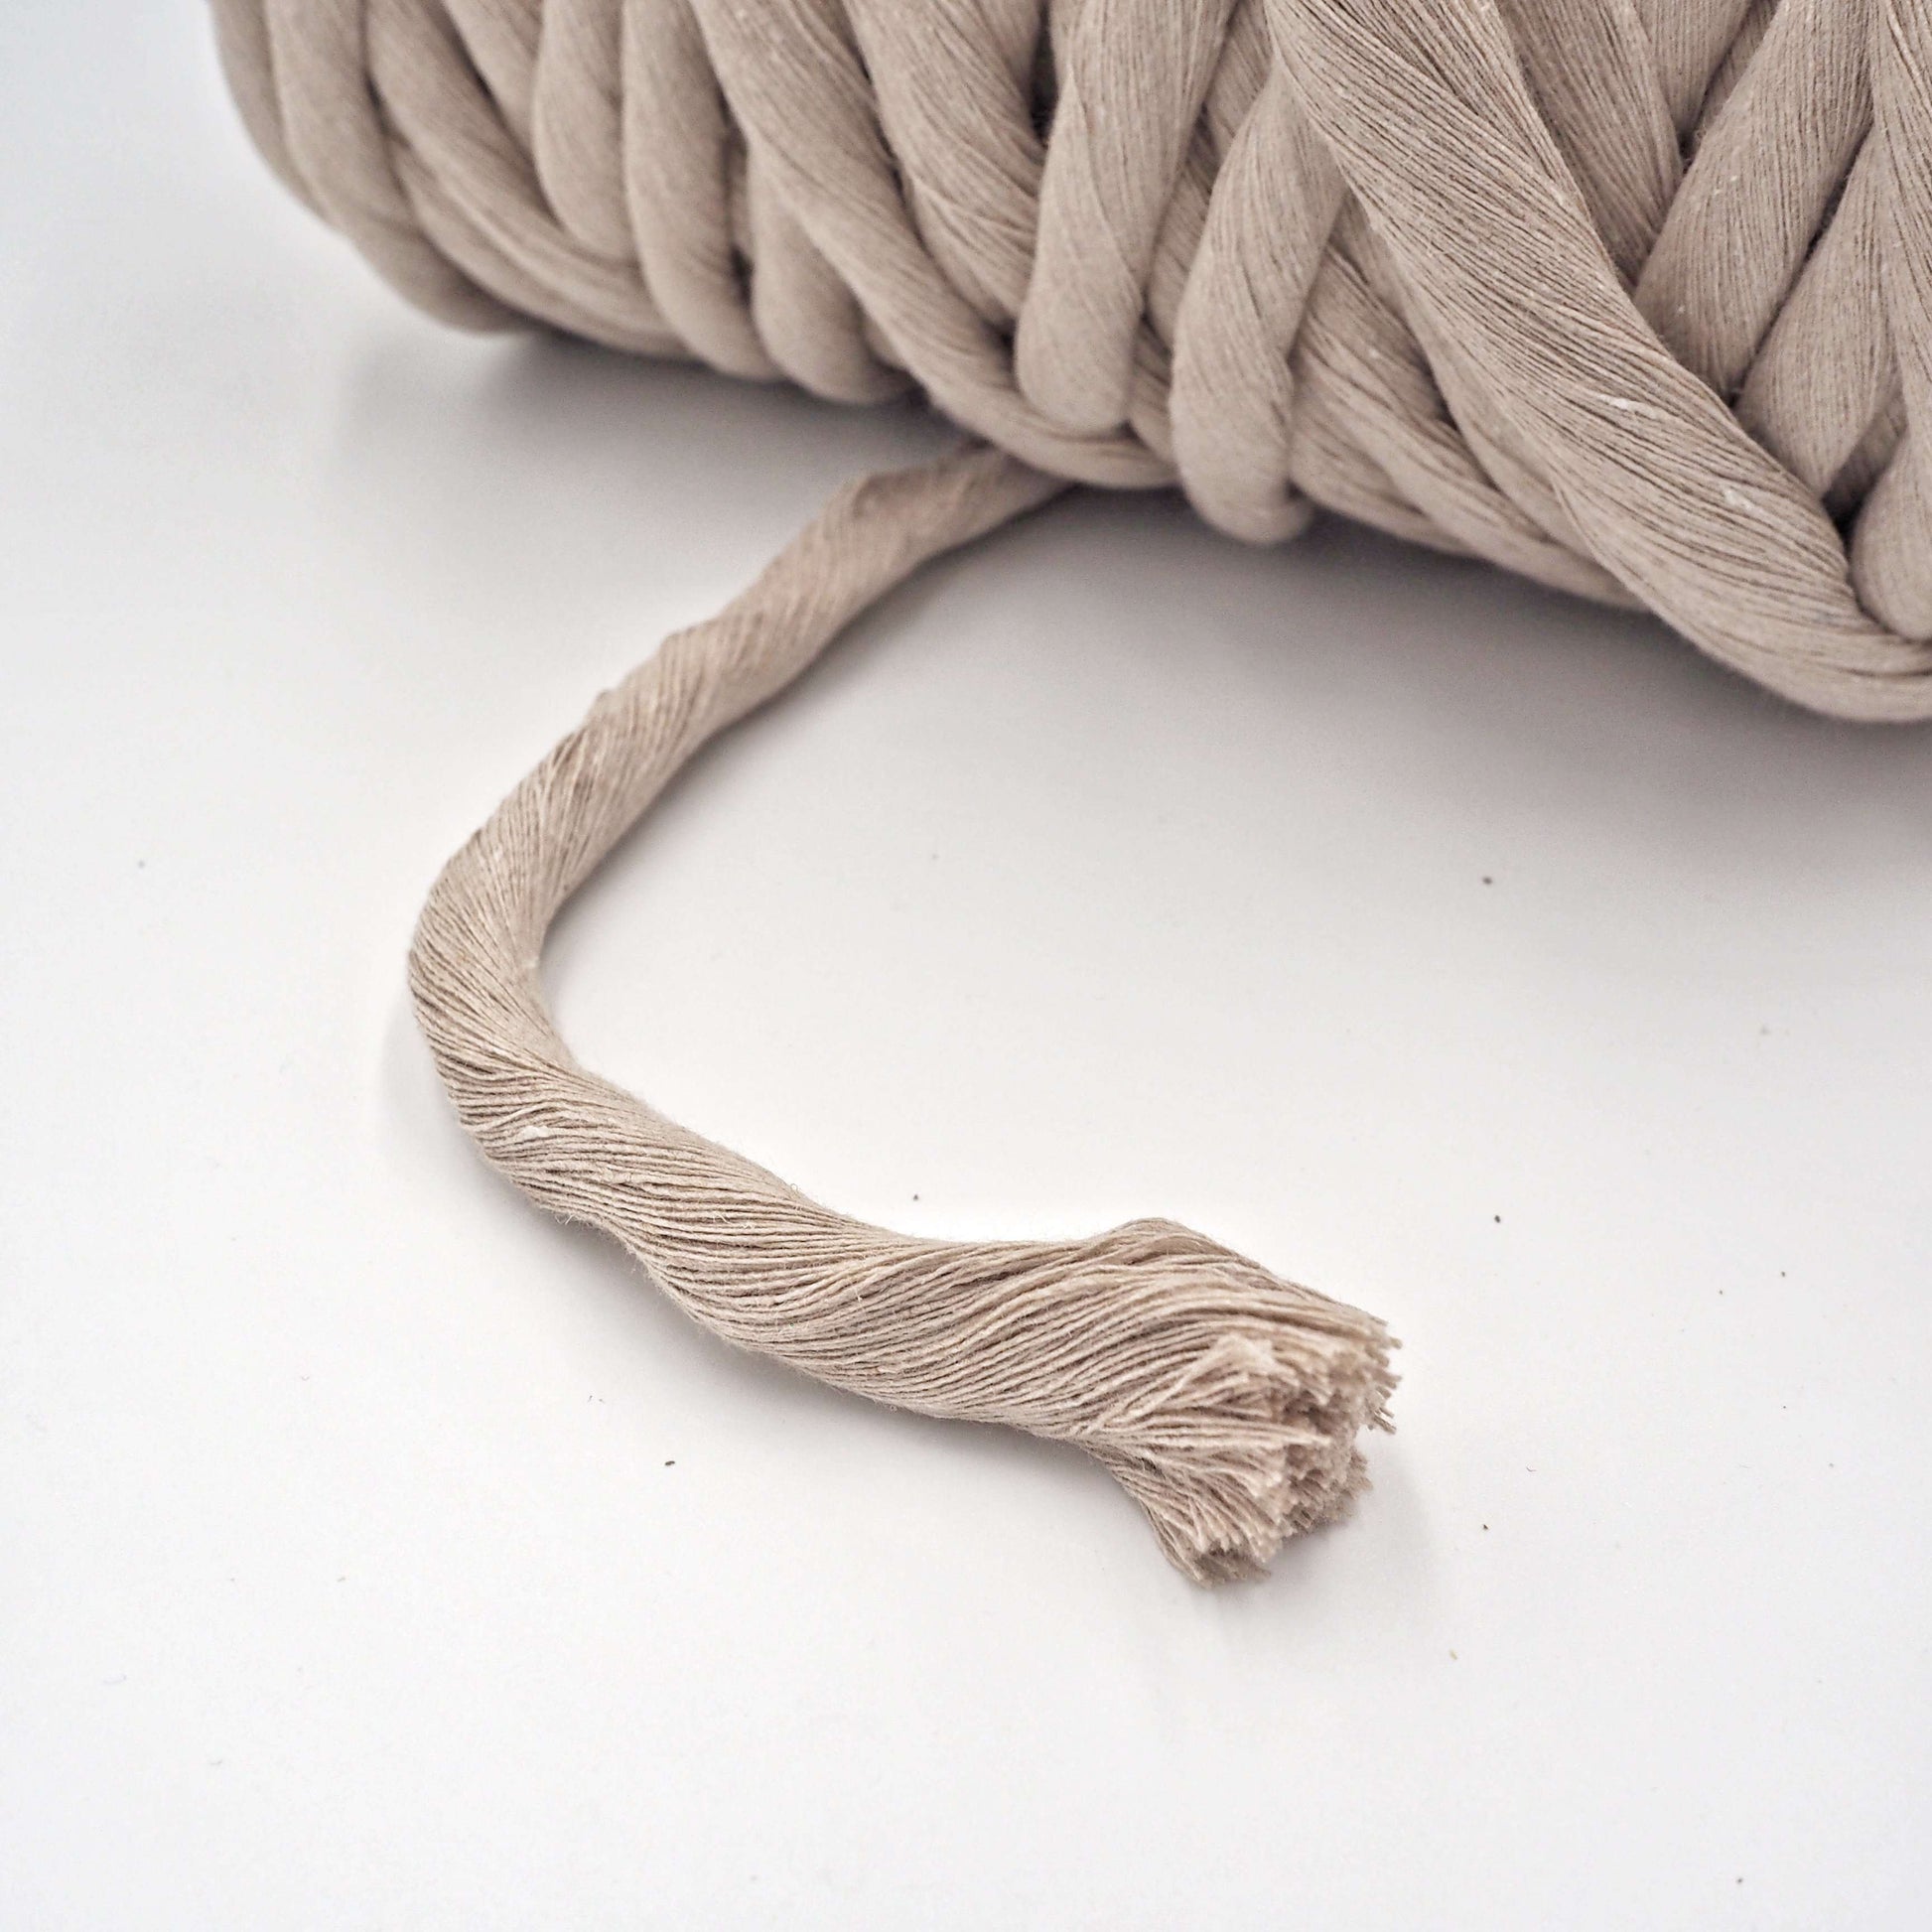 Thick cotton 1PLY string, Natural, 9mm